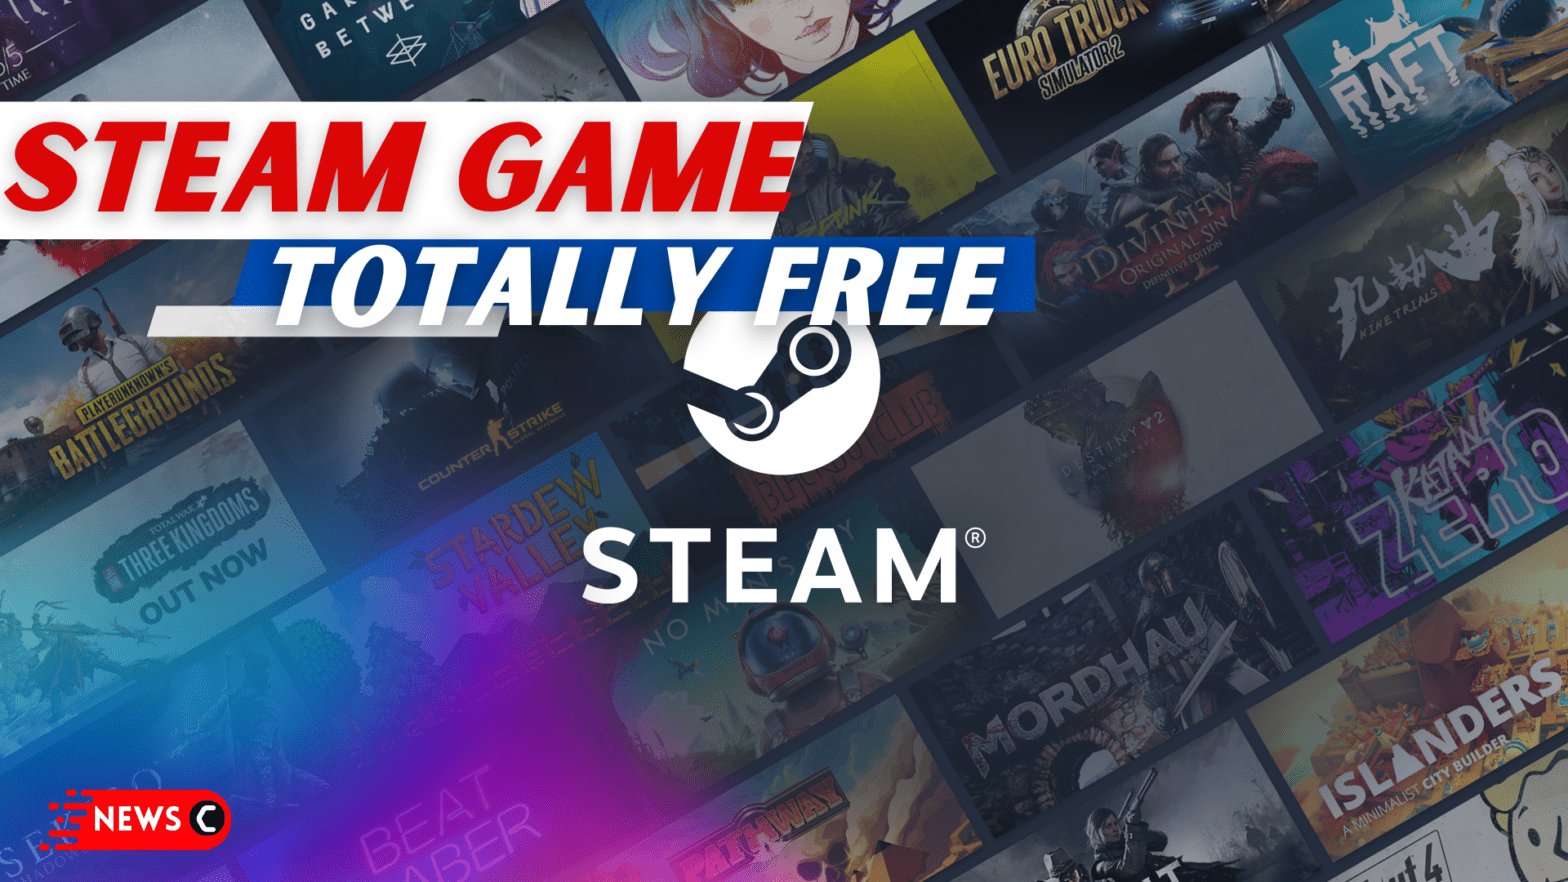 Steam Game Made Free to Keep for a Very Limited Time